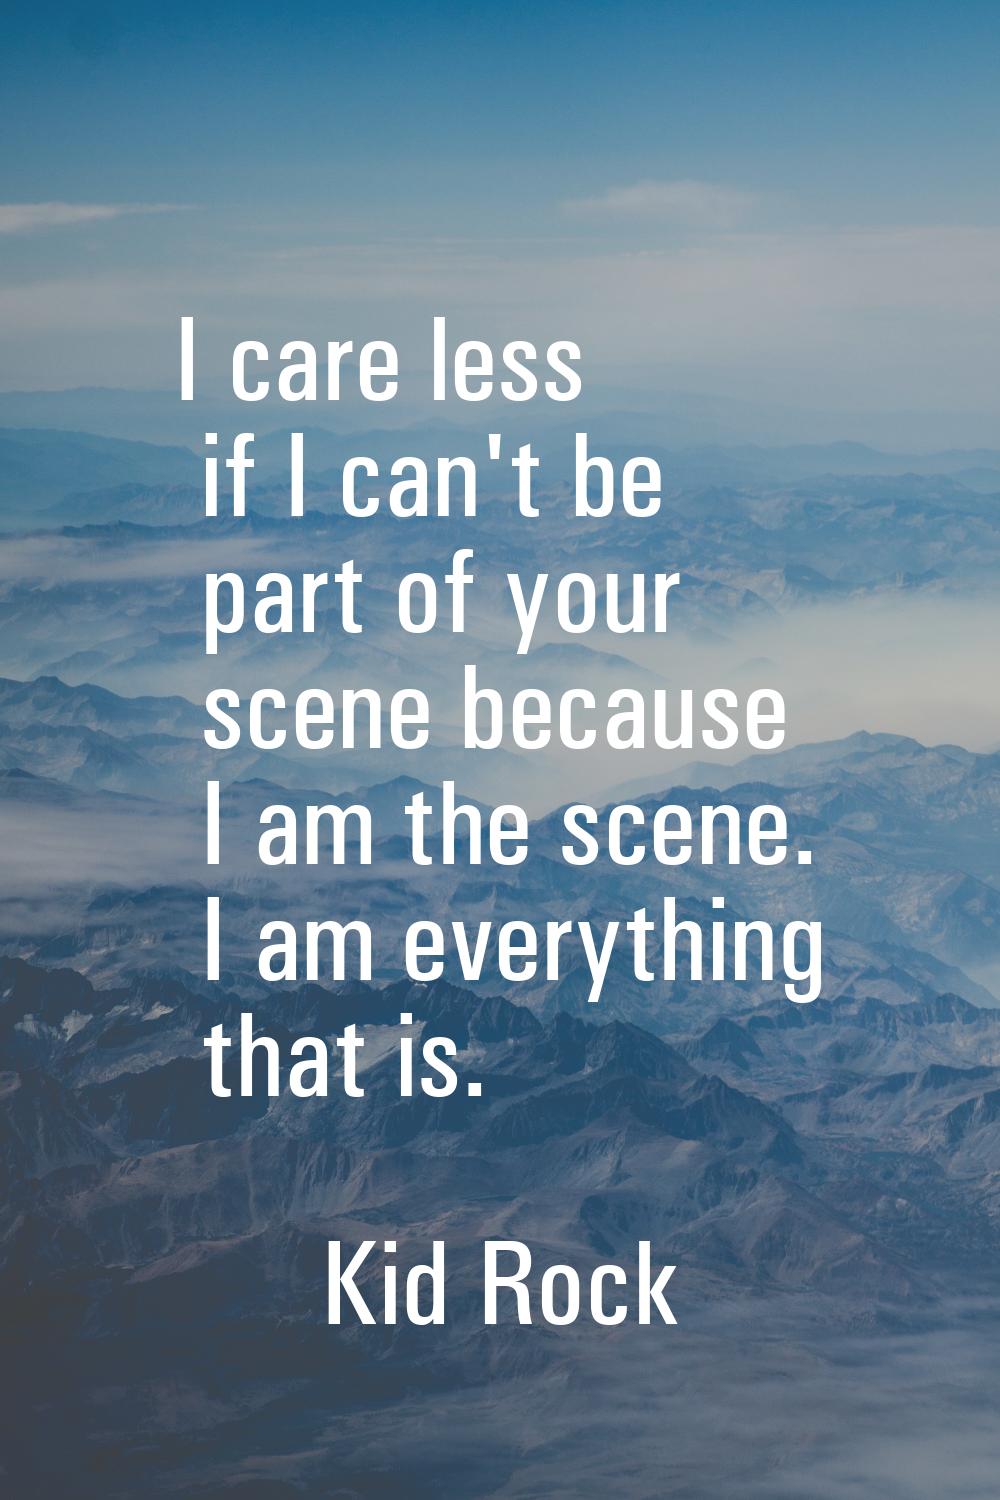 I care less if I can't be part of your scene because I am the scene. I am everything that is.